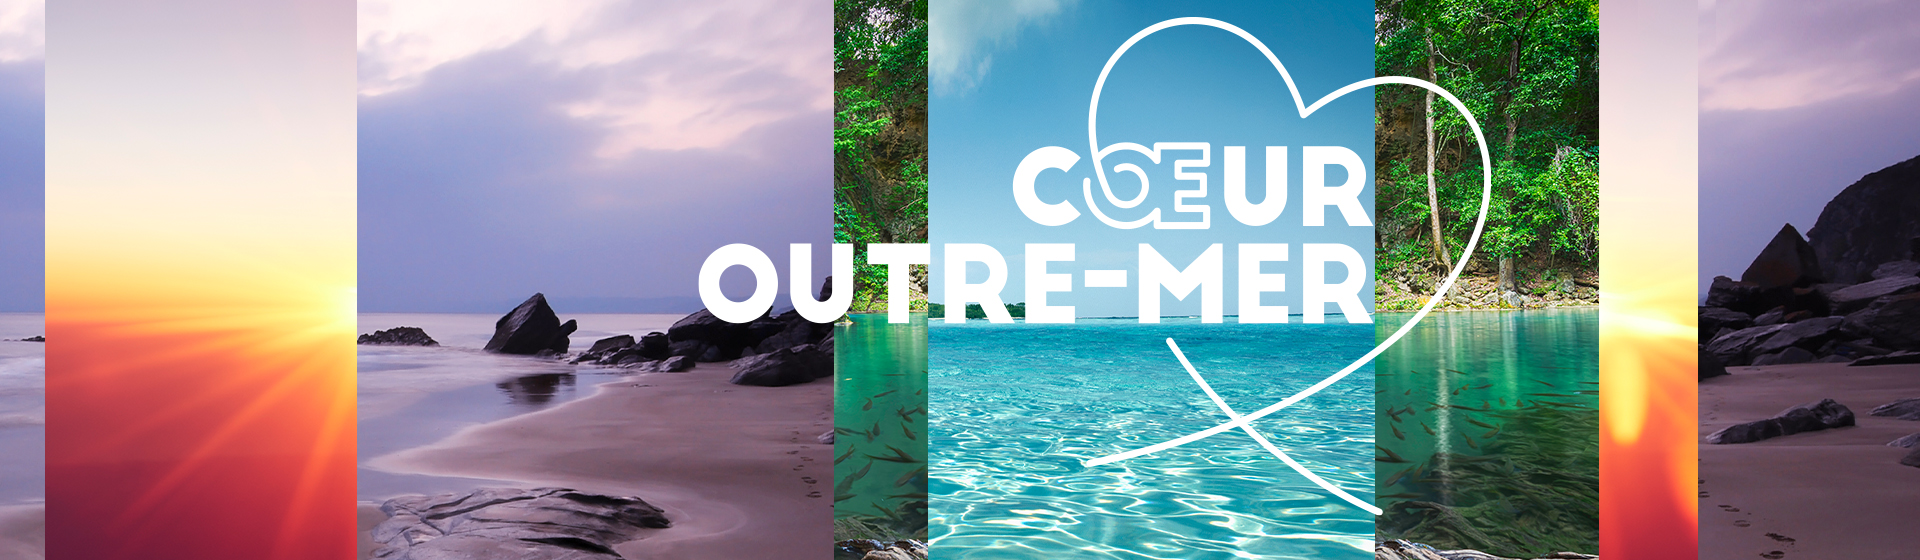 Operation coeur Outre-mer